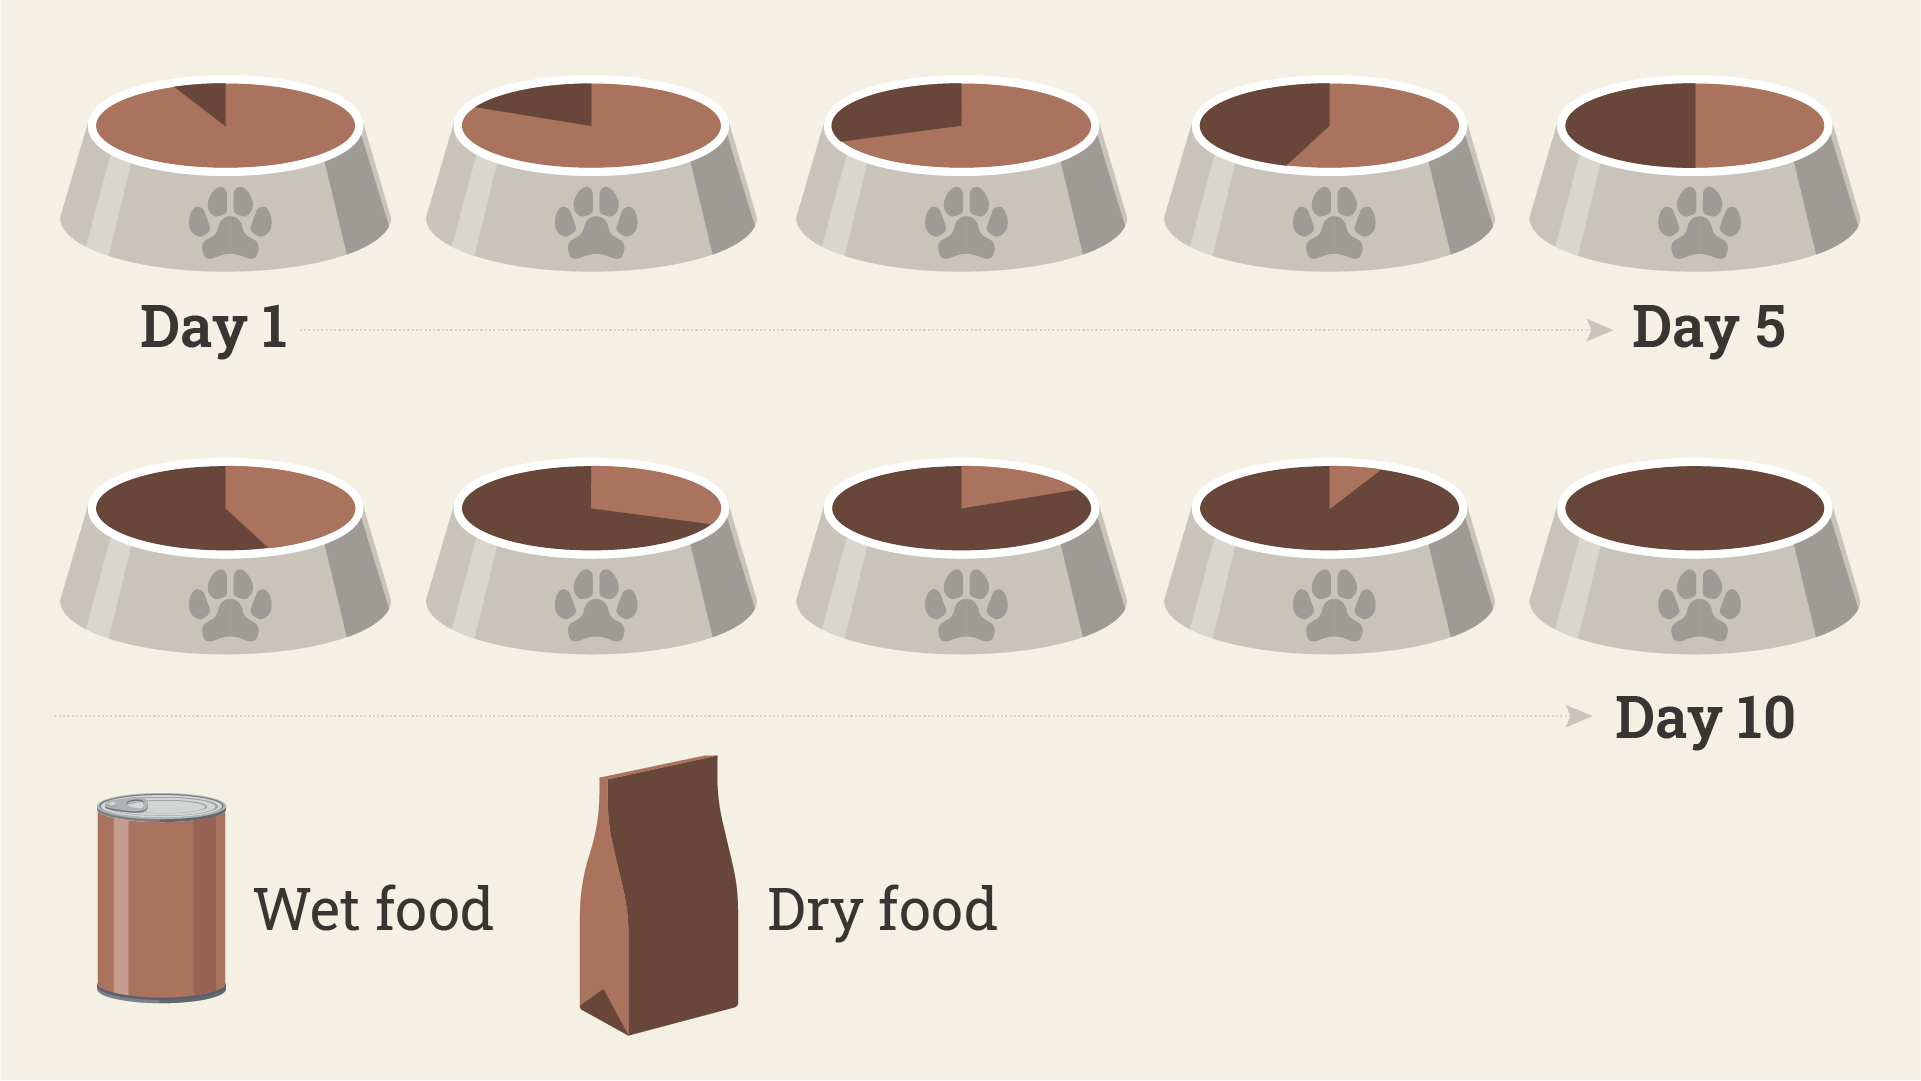 transitioning from wet to dry food